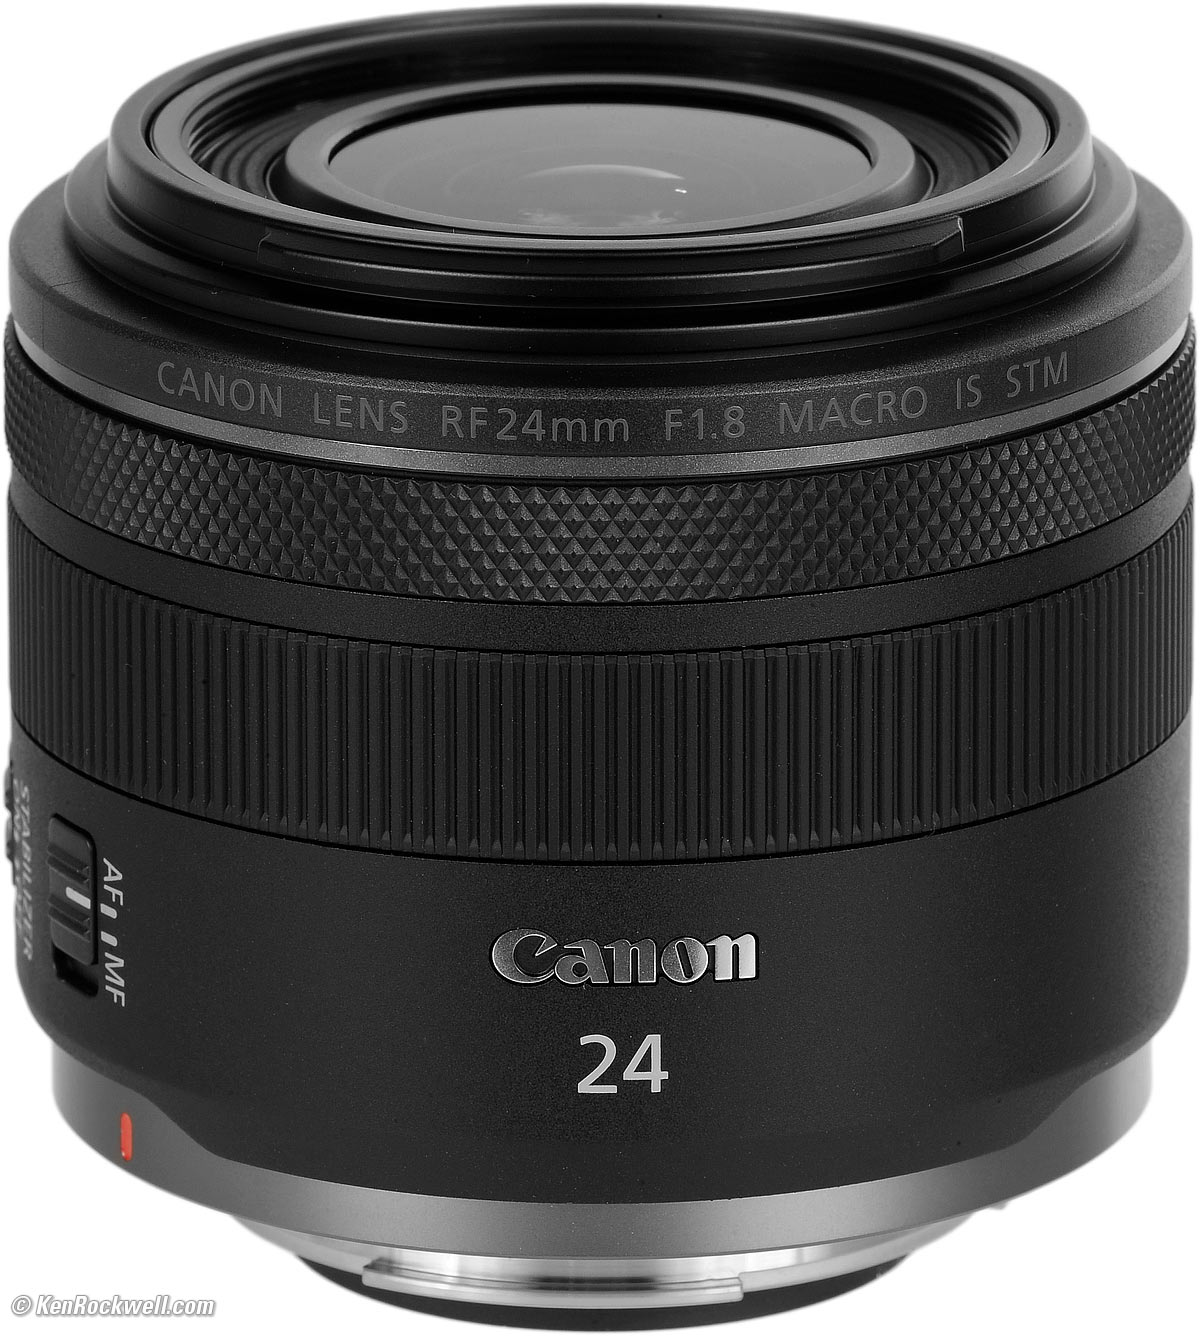 Canon EOS R7 Mirrorless Camera with RF-S 18-150mm F3.5-6.3 IS STM and RF  85mm f2 Macro IS STM Lens - Mike's Camera